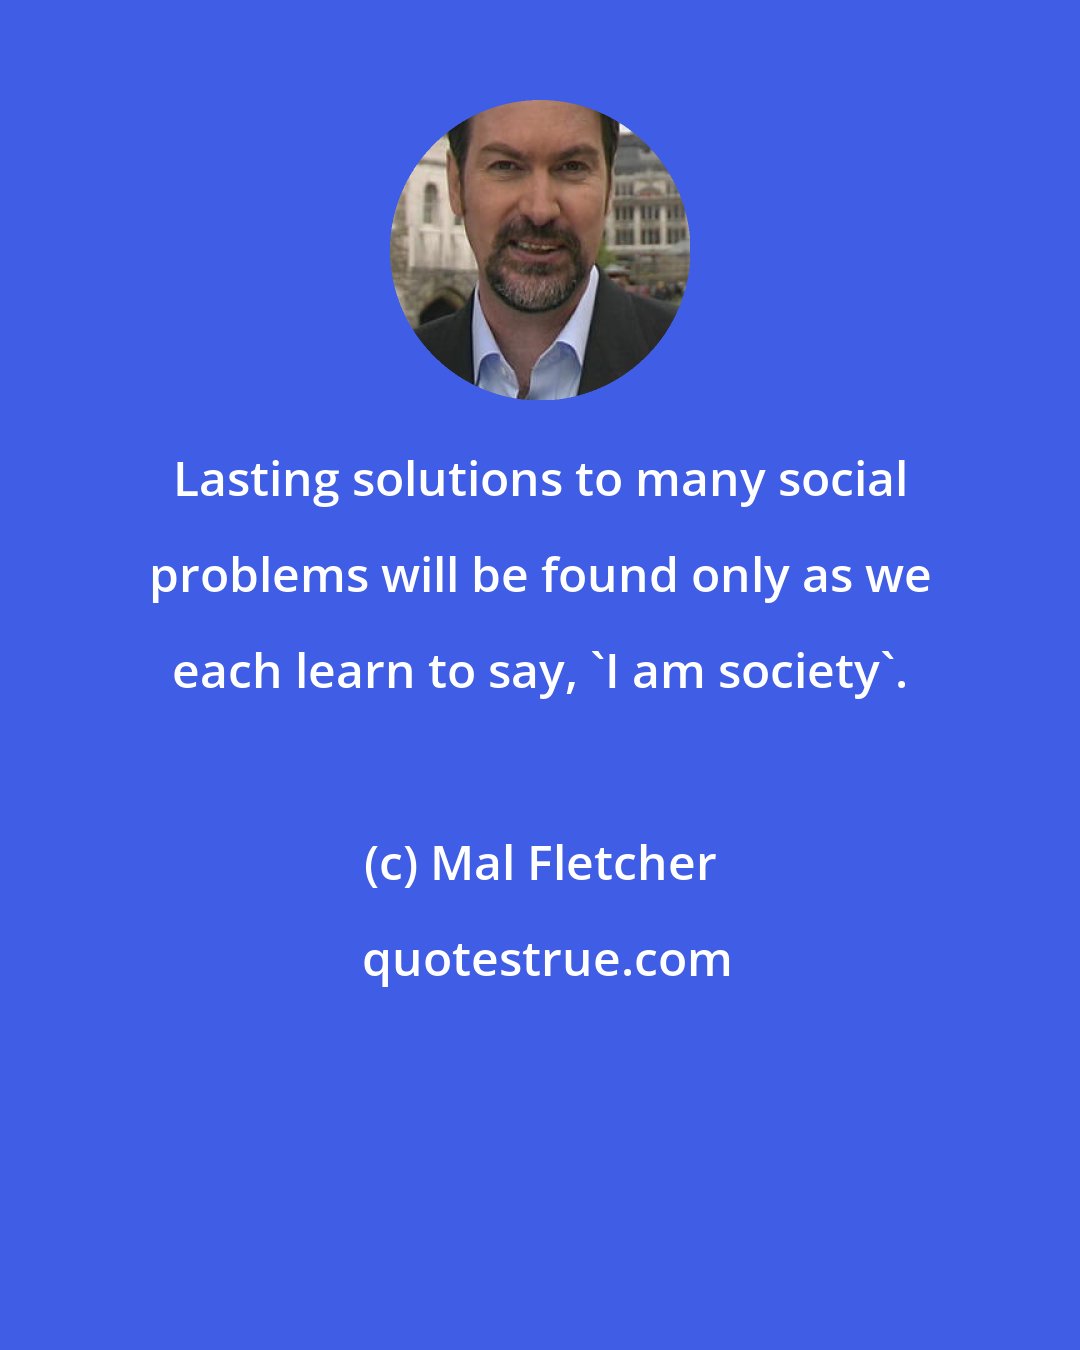 Mal Fletcher: Lasting solutions to many social problems will be found only as we each learn to say, 'I am society'.